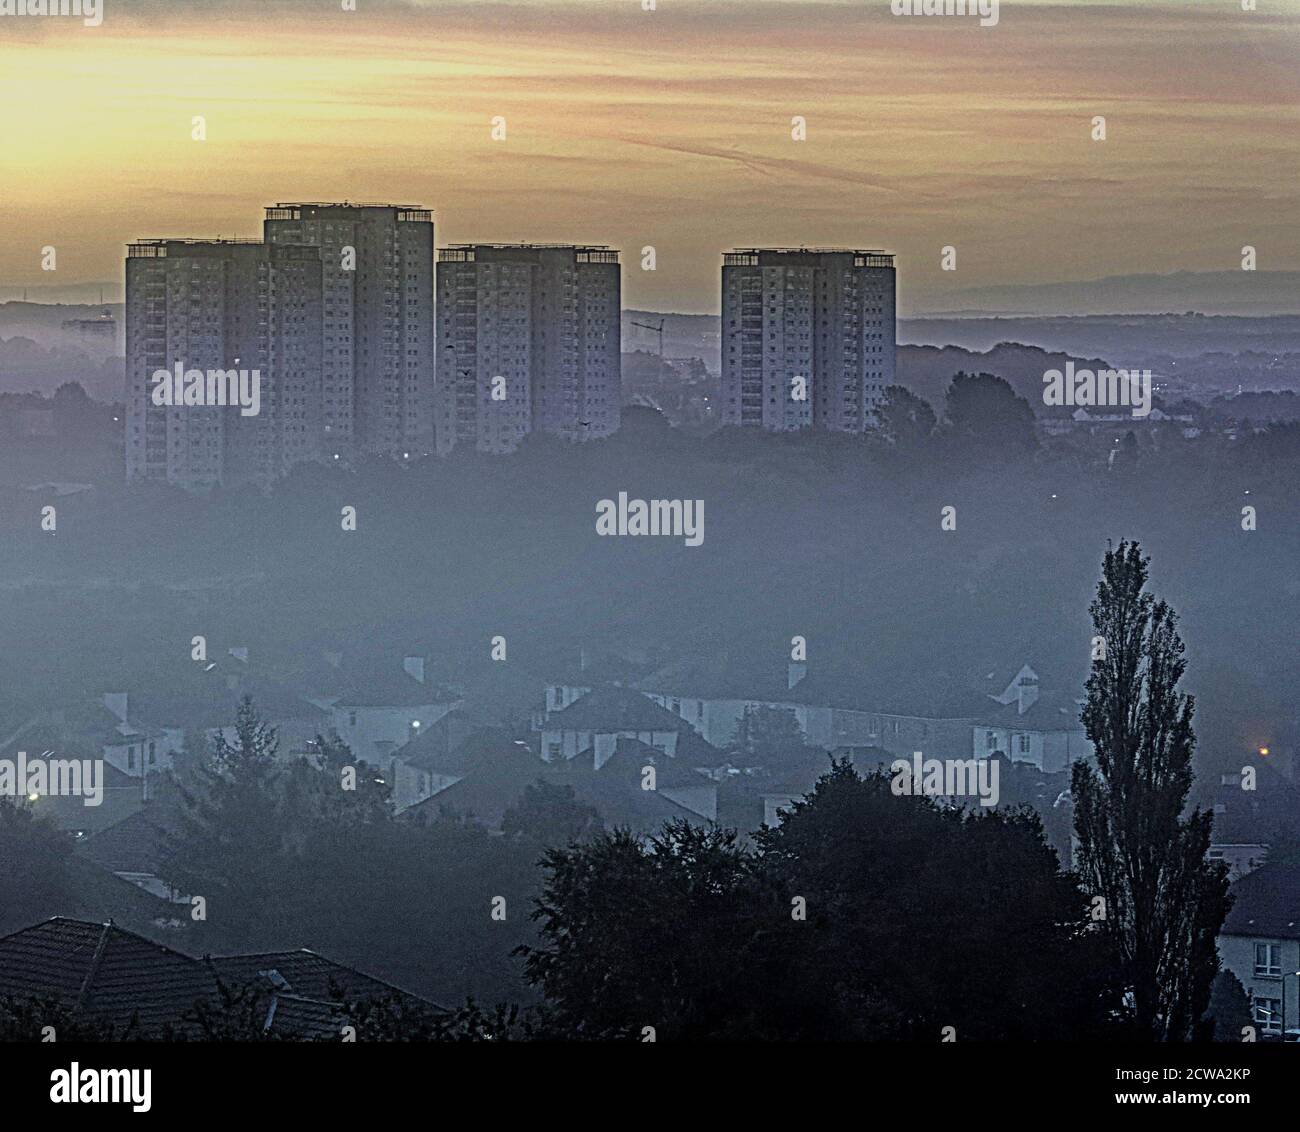 Glasgow, Scotland, UK, 29th September, 2020: UK Weather: Cold start saw freezing temperatures overnight as fog decimated the city leaving only the tops of the lincoln  towers and silhouettes overnight Credit: Gerard Ferry/Alamy Live News Stock Photo